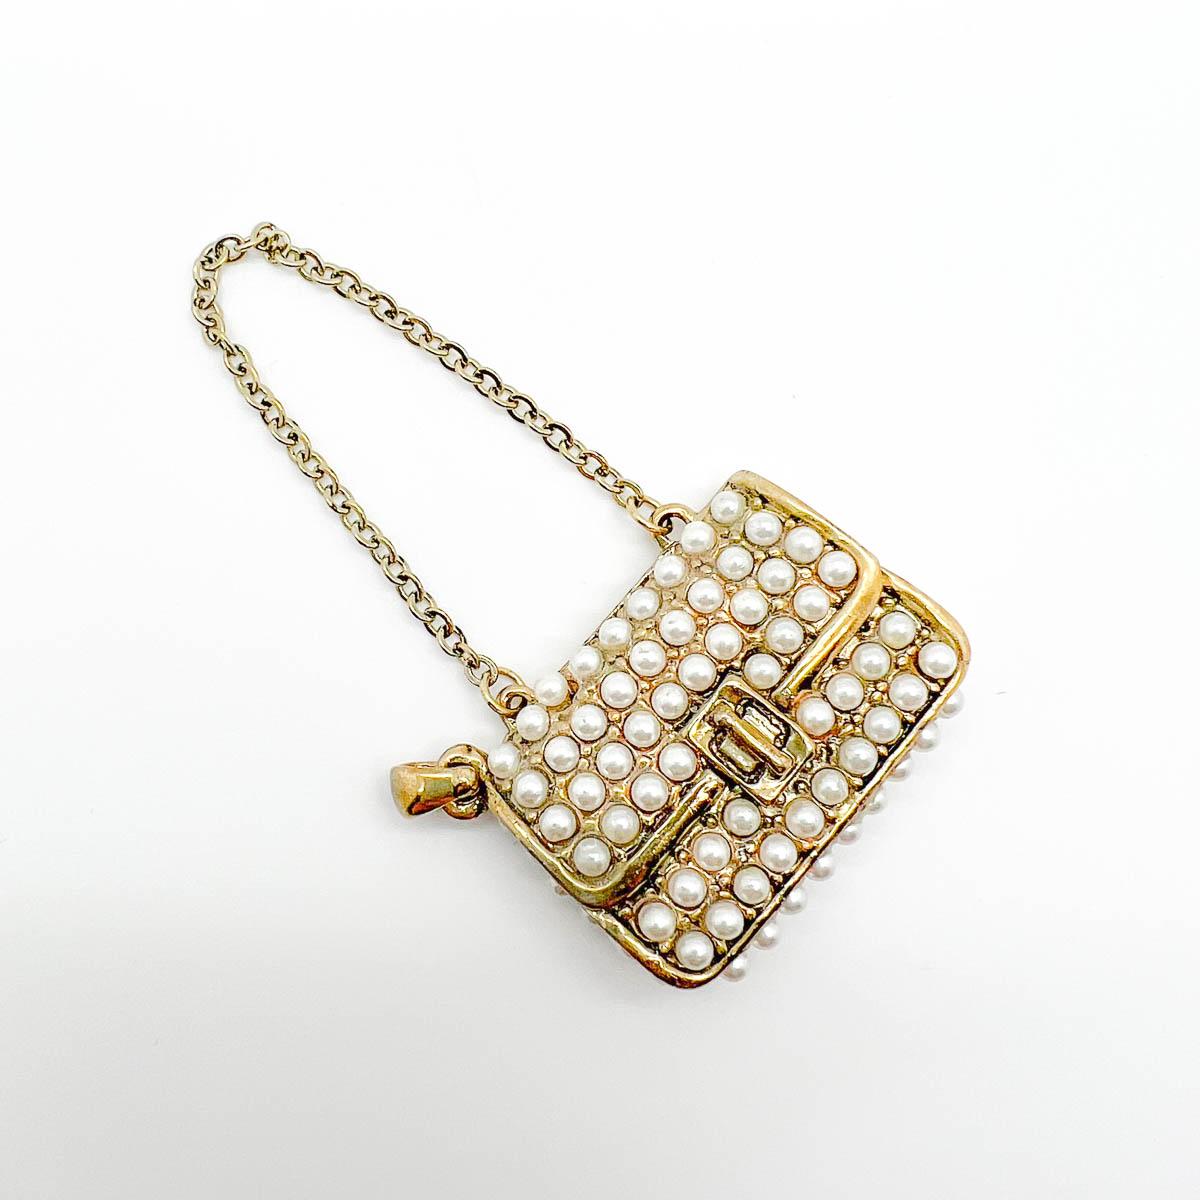 Pearl Encrusted Handbag Pendant 2000s In Good Condition For Sale In Wilmslow, GB